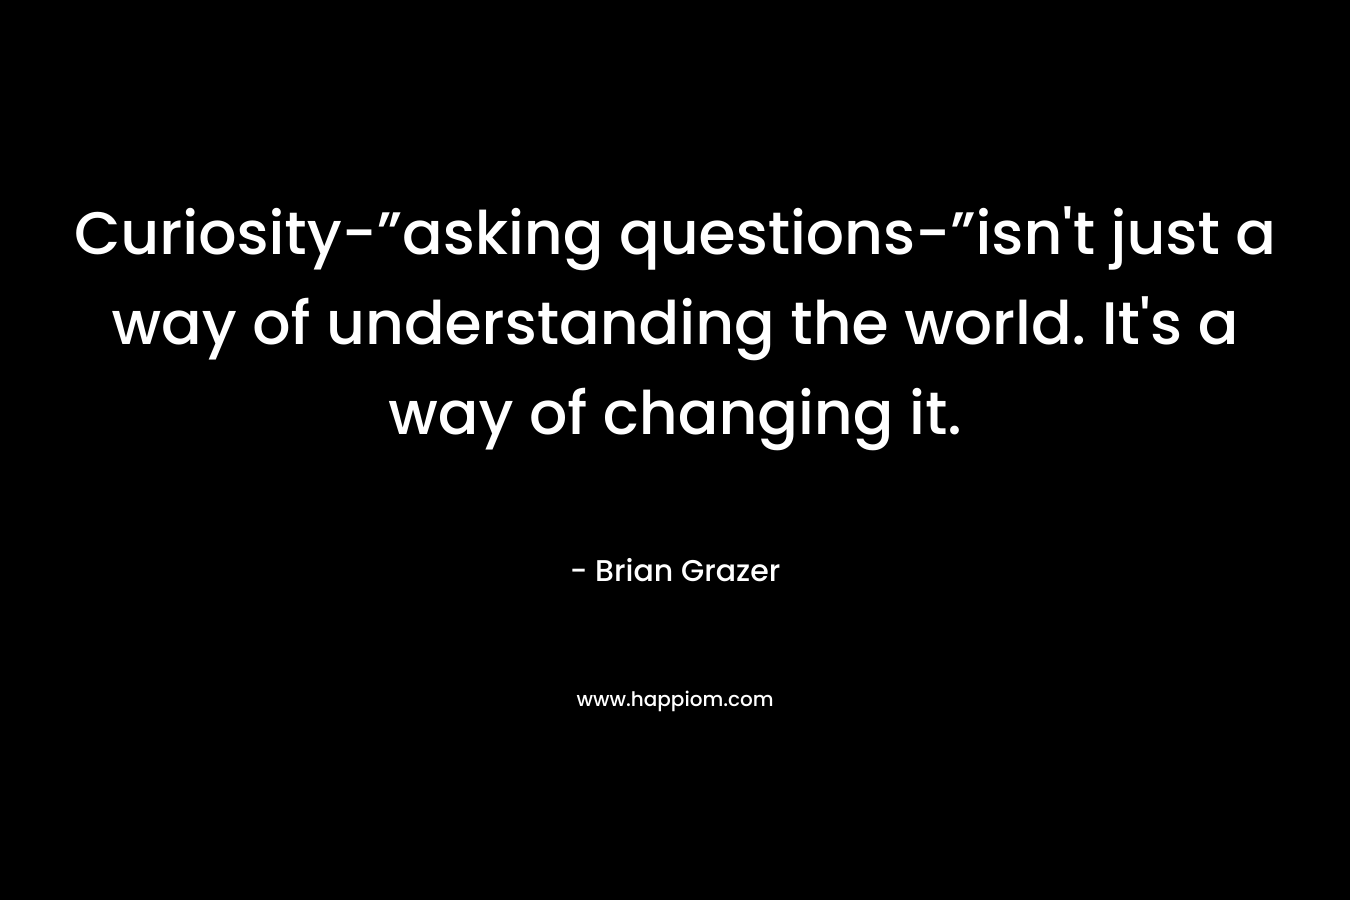 Curiosity-”asking questions-”isn't just a way of understanding the world. It's a way of changing it.